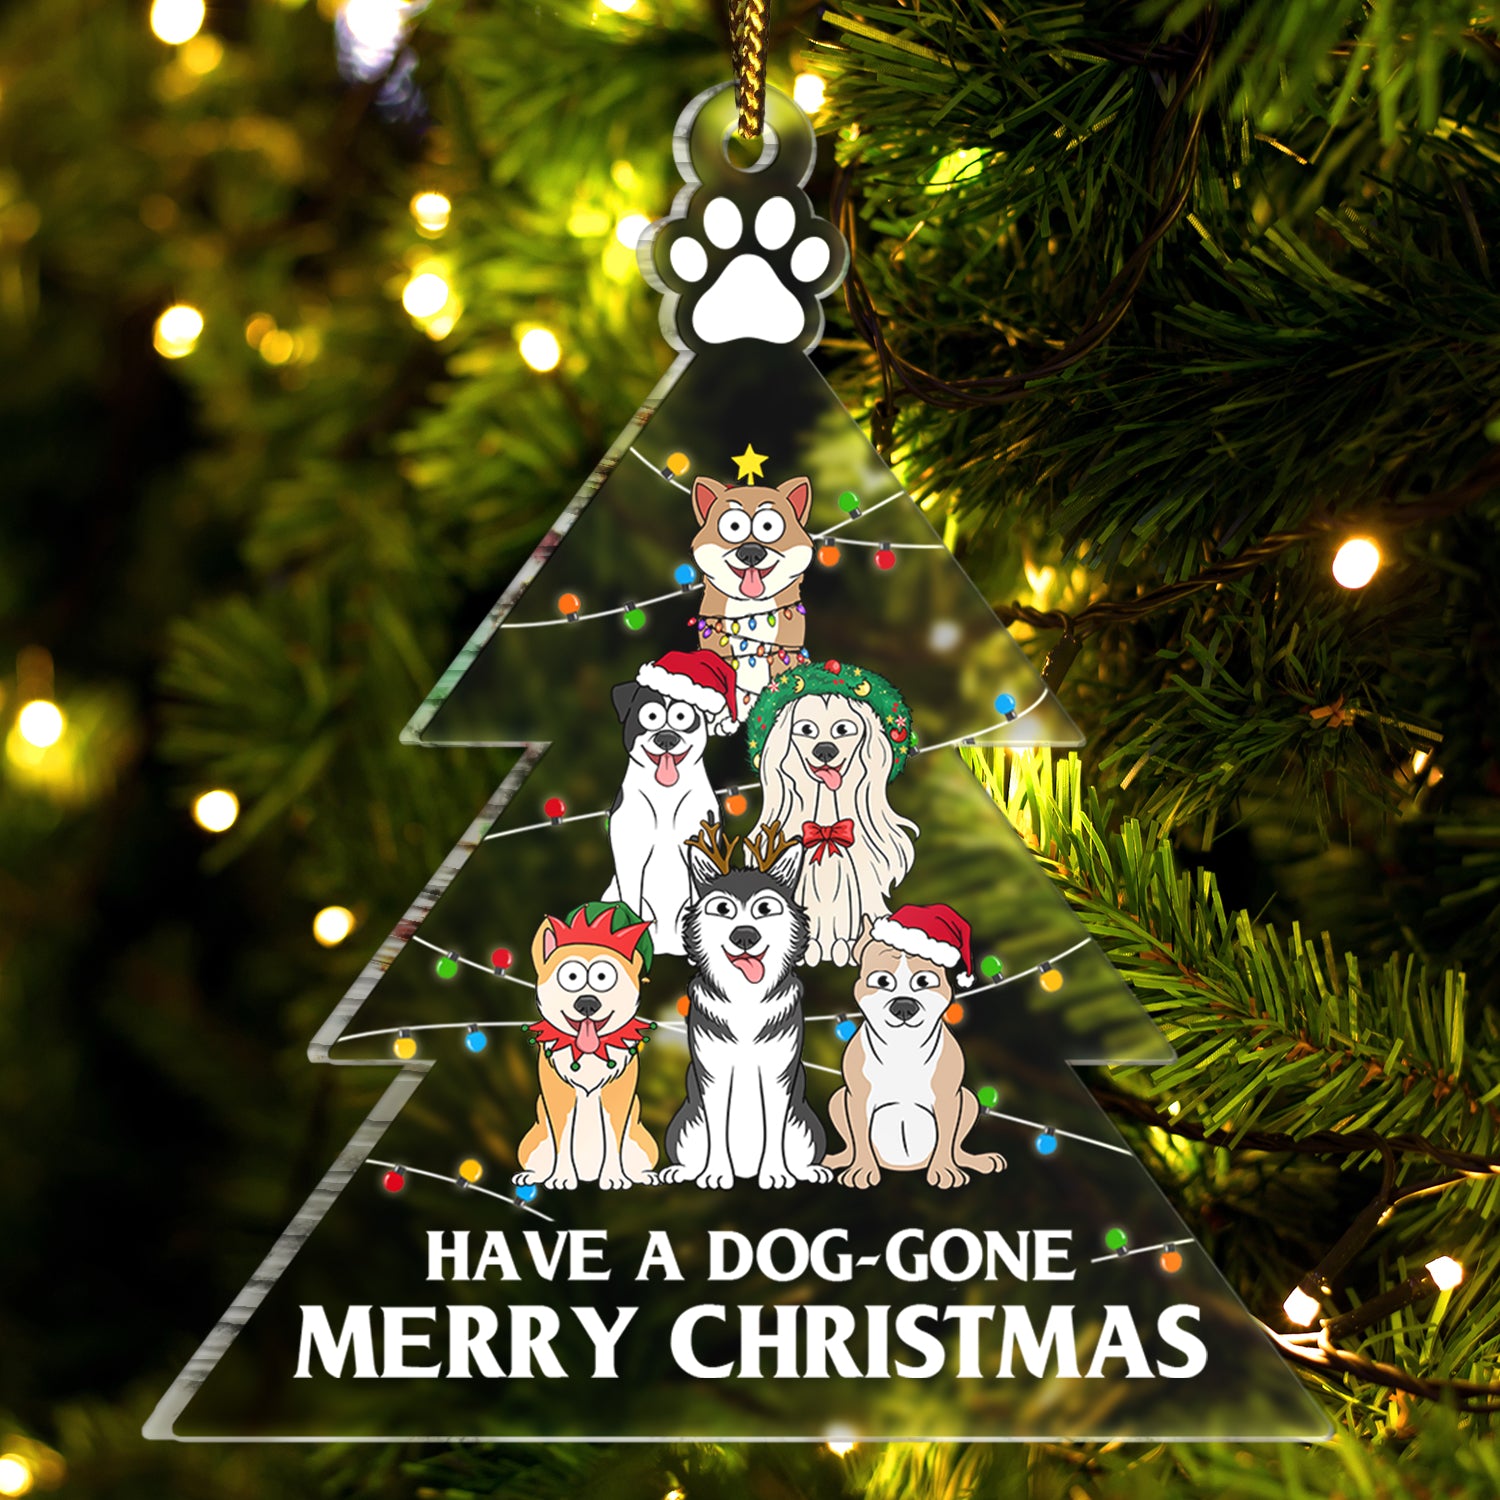 A Dog-gone Christmas - Christmas Gift For Dog Lovers - Personalized Custom Shaped Acrylic Ornament